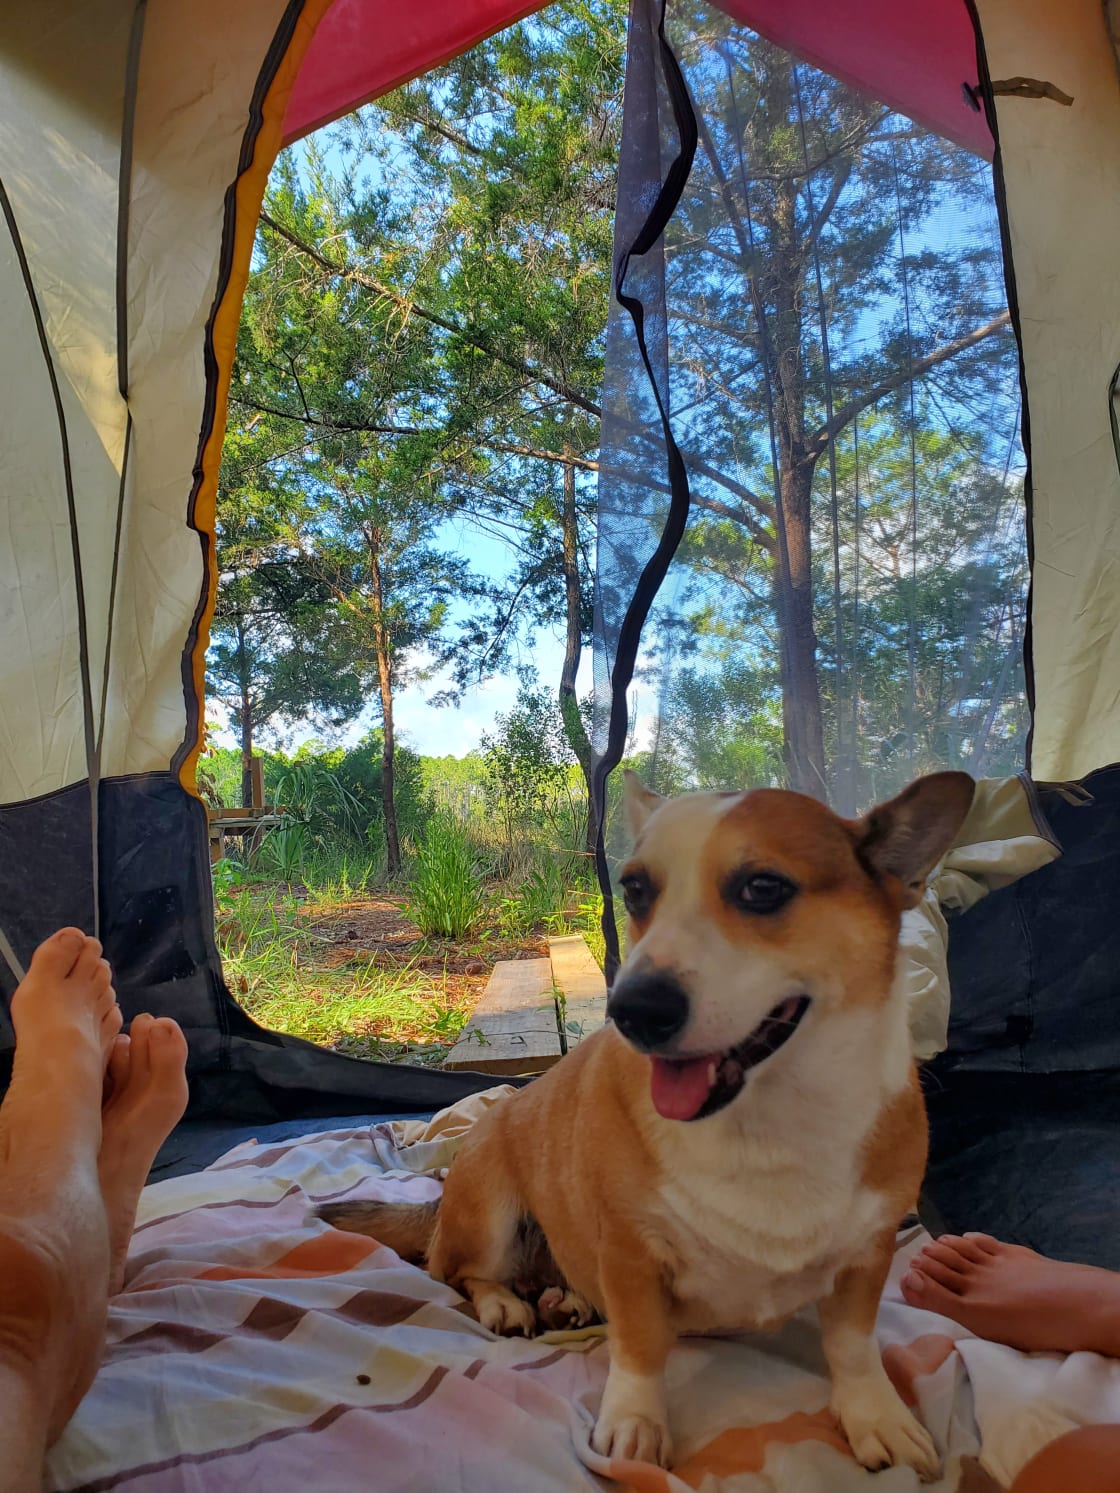 our morning view and happy animal